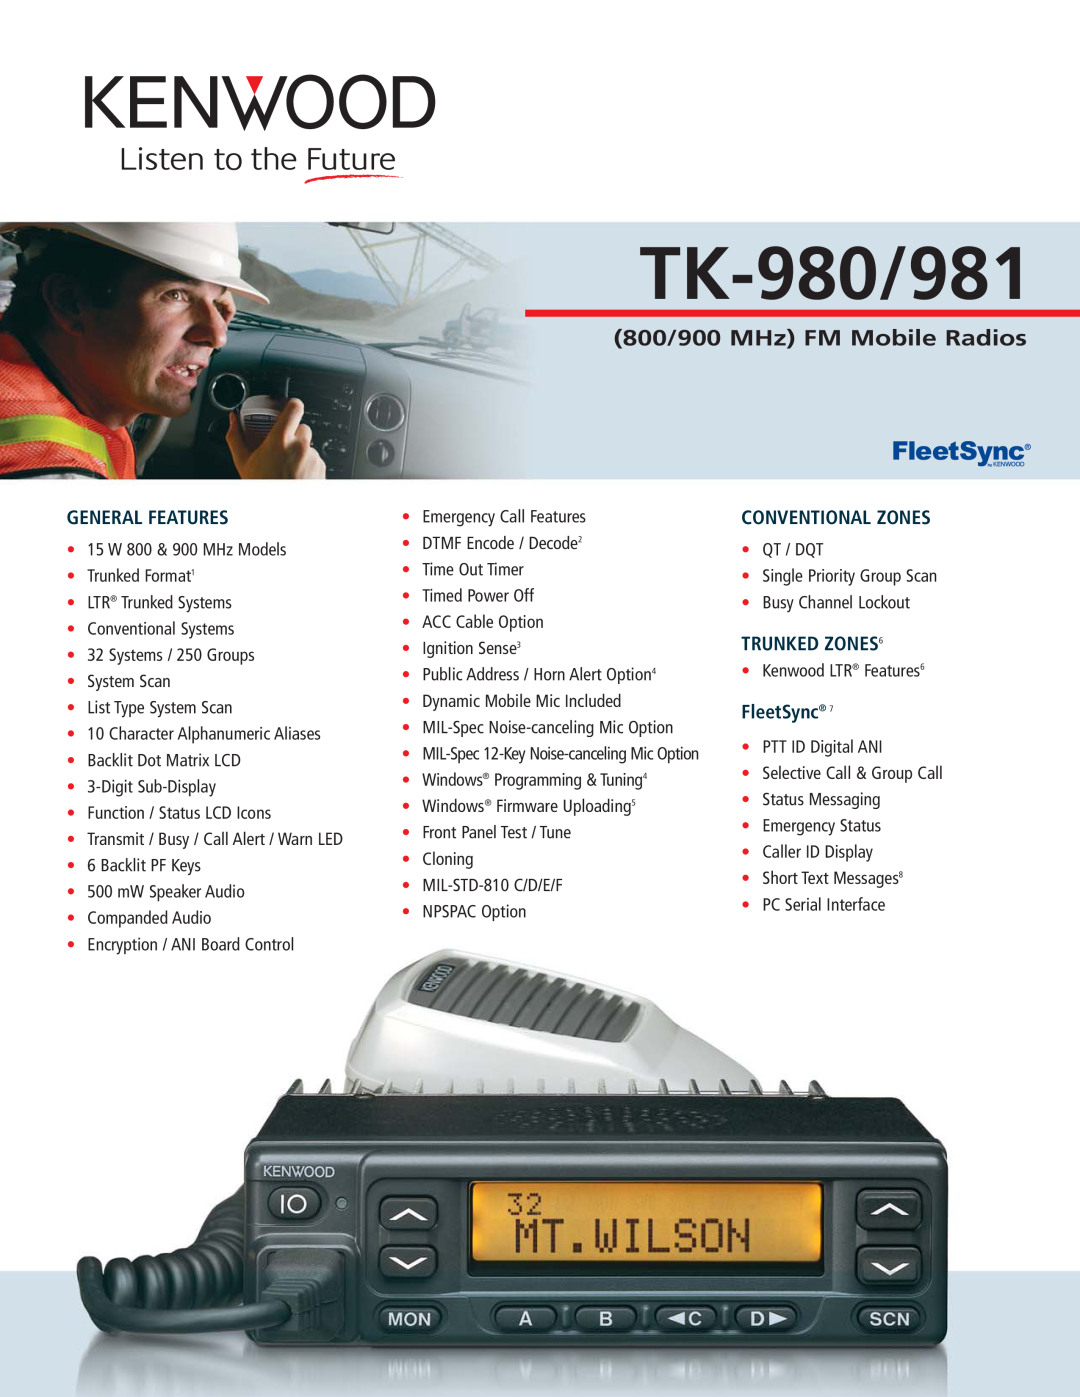 Kenwood TK-981 manual TK-980/981, 800/900 MHz FM Mobile Radios, General Features, Conventional Zones, TRUNKED ZONES6 